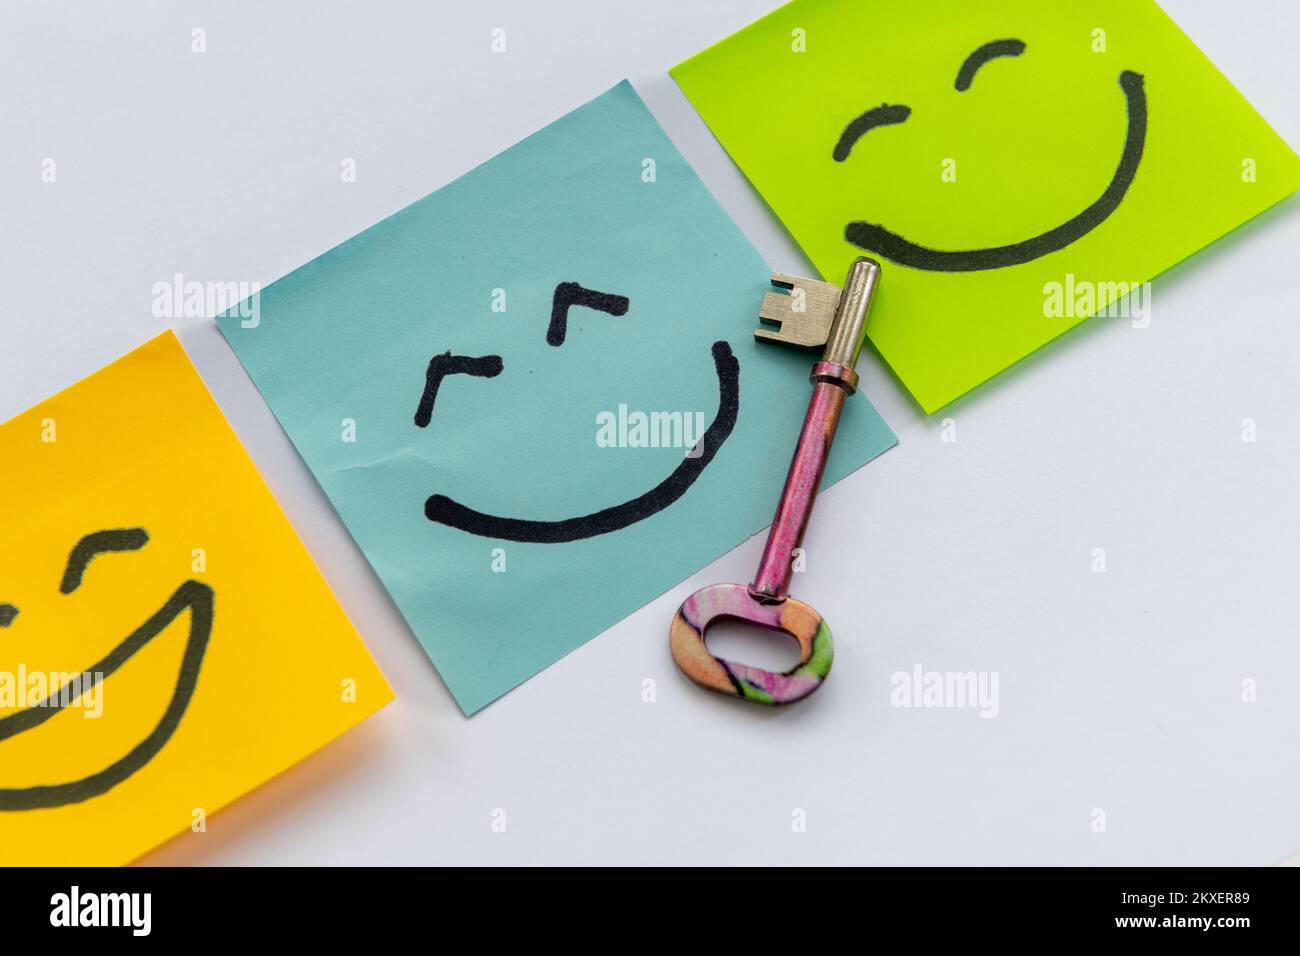 A key to happiness concept with a key and hand drawn happy faces isolated in a white background. Stock Photo